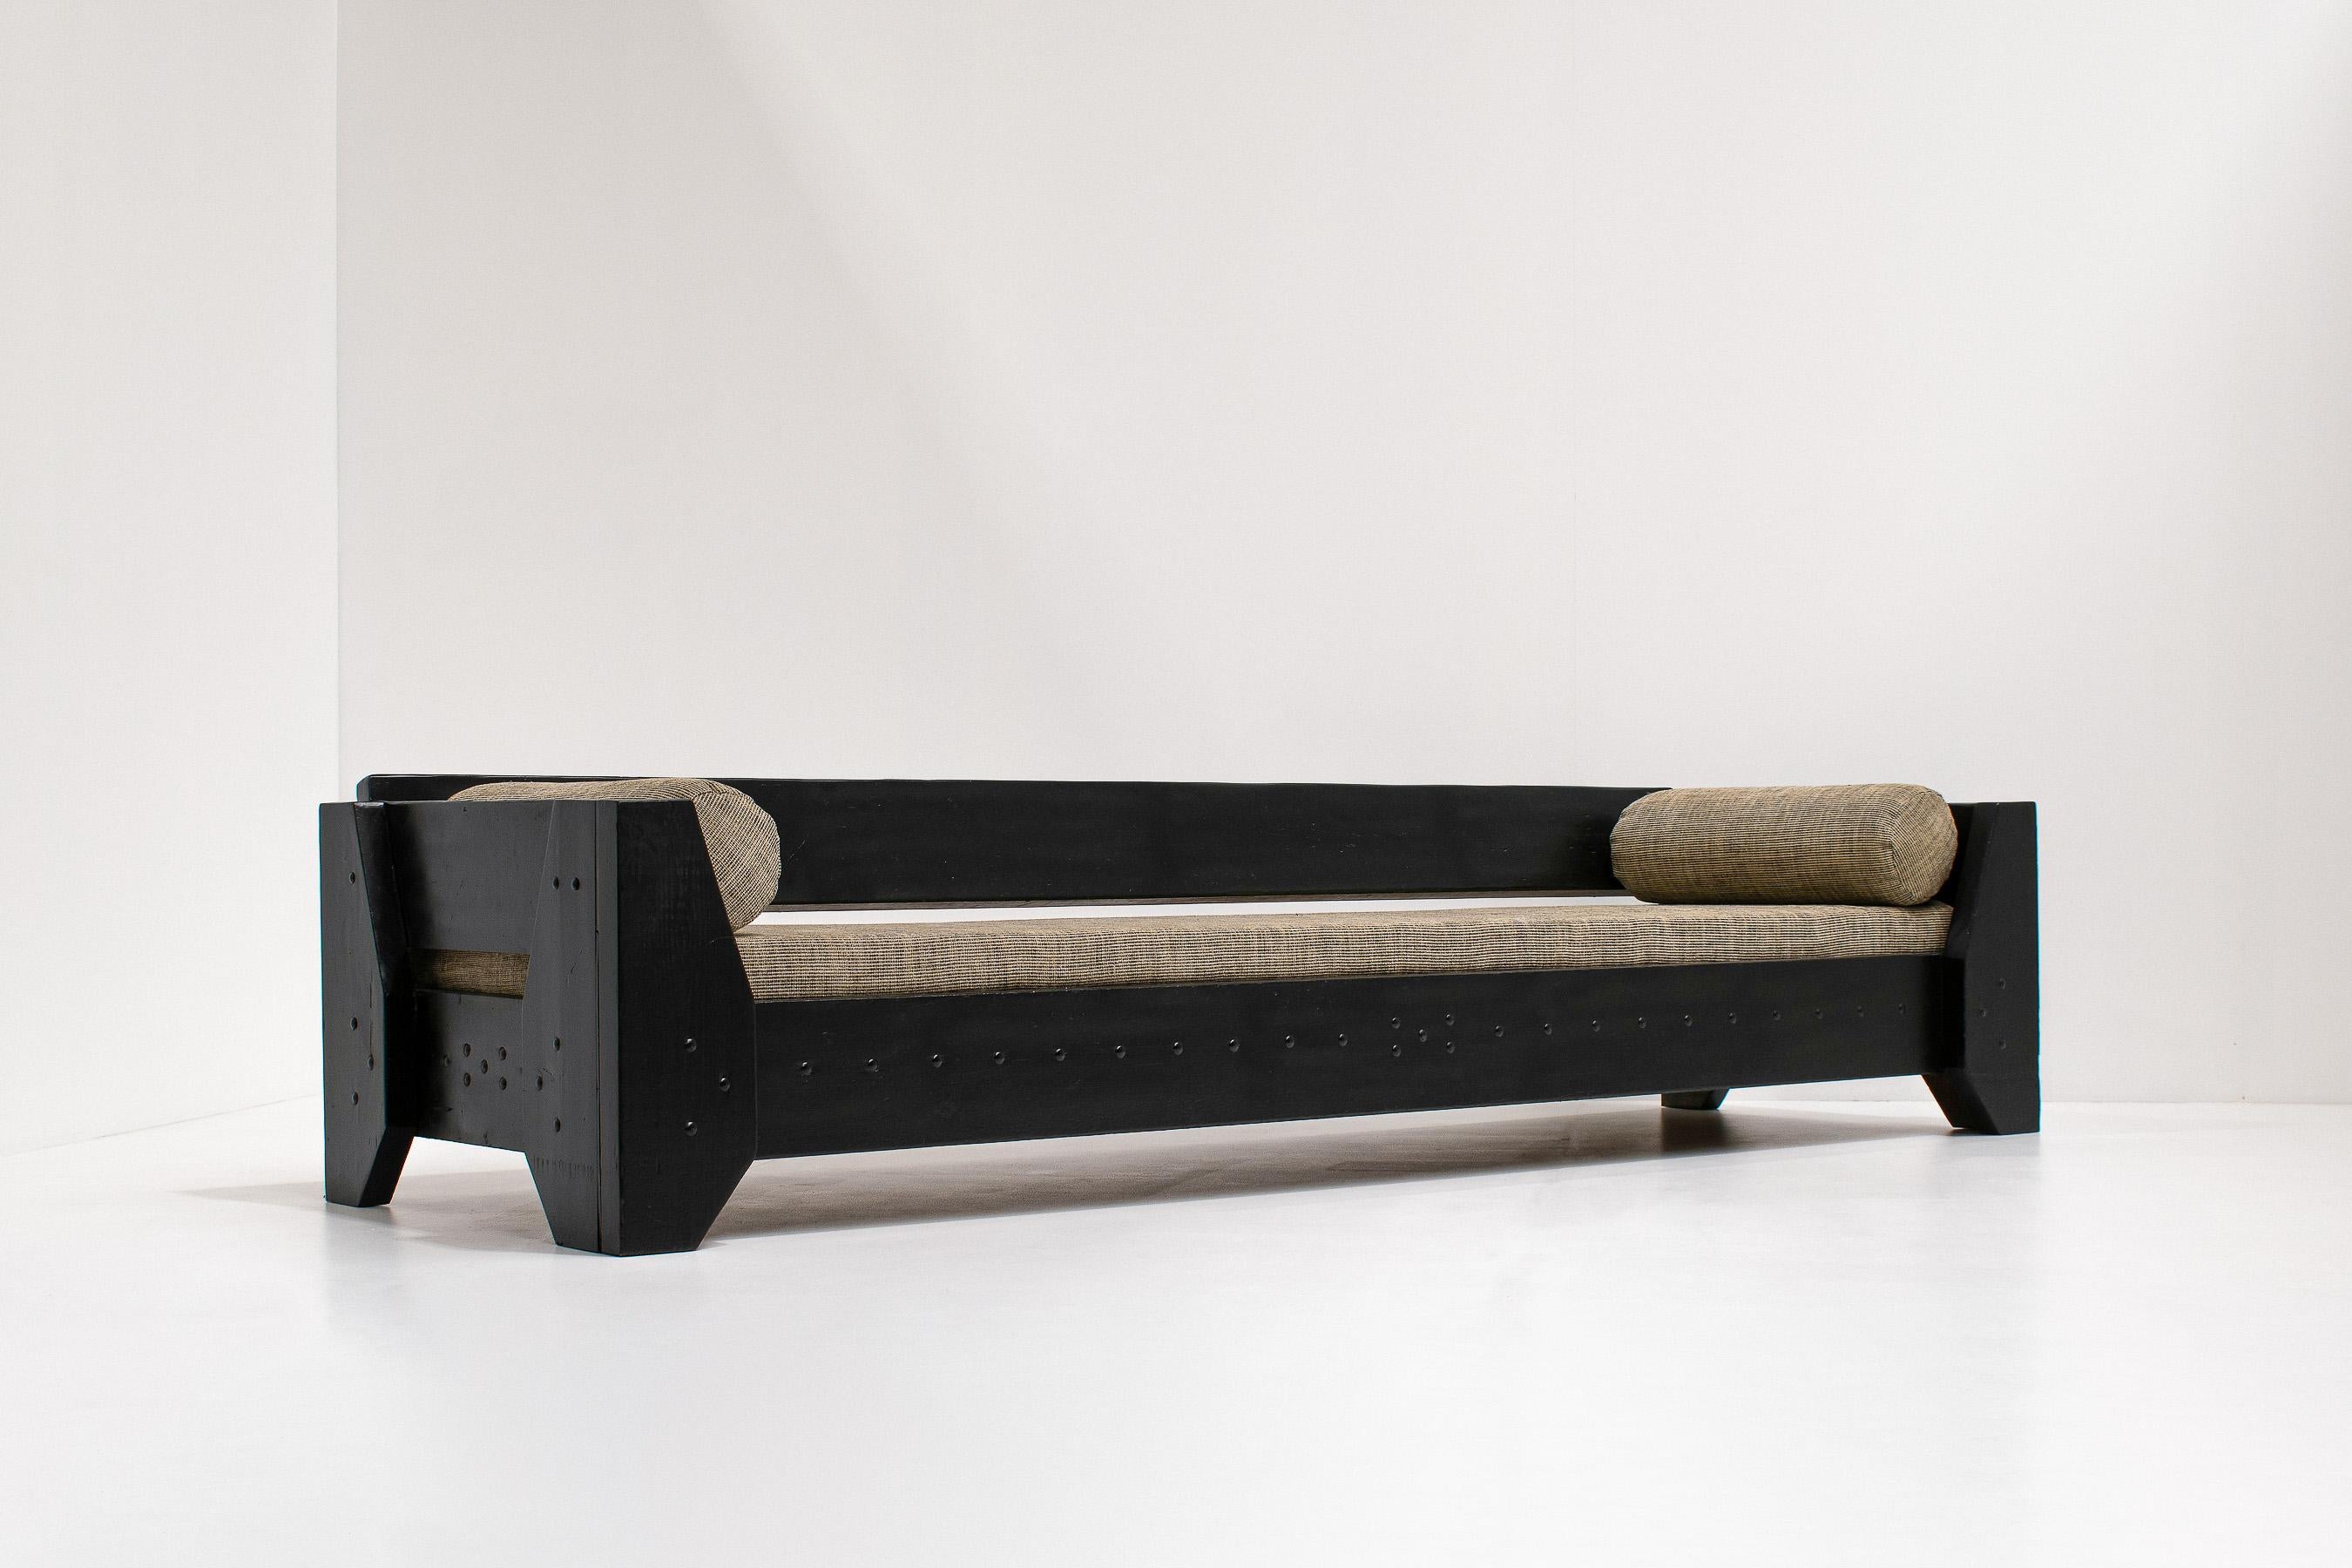 Sophisticated daybed with brutalist details and a solid wooden frame, 1960s, Mid-century, Modernism.
Sourced in the Netherlands and reminiscent of design of Dom Hans Van Der Laan or designs of the Bossche school. It is an exceptional piece due to